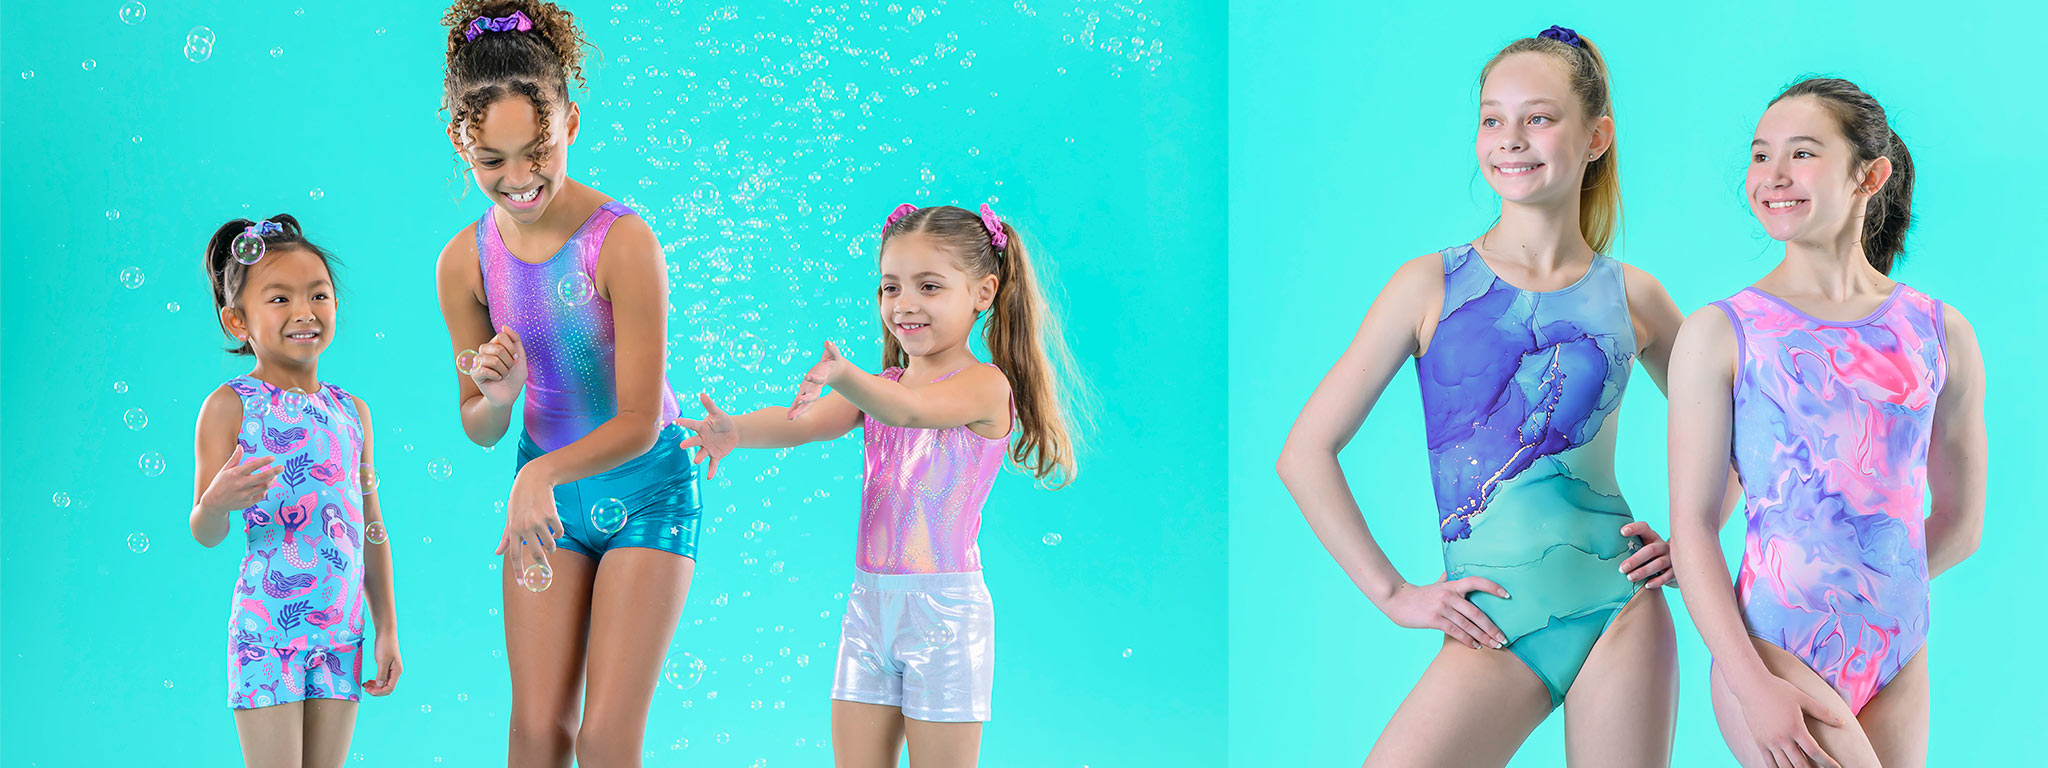 Mermaid and sea themed gymnastics outfits for young gymnasts by Destira, 2024